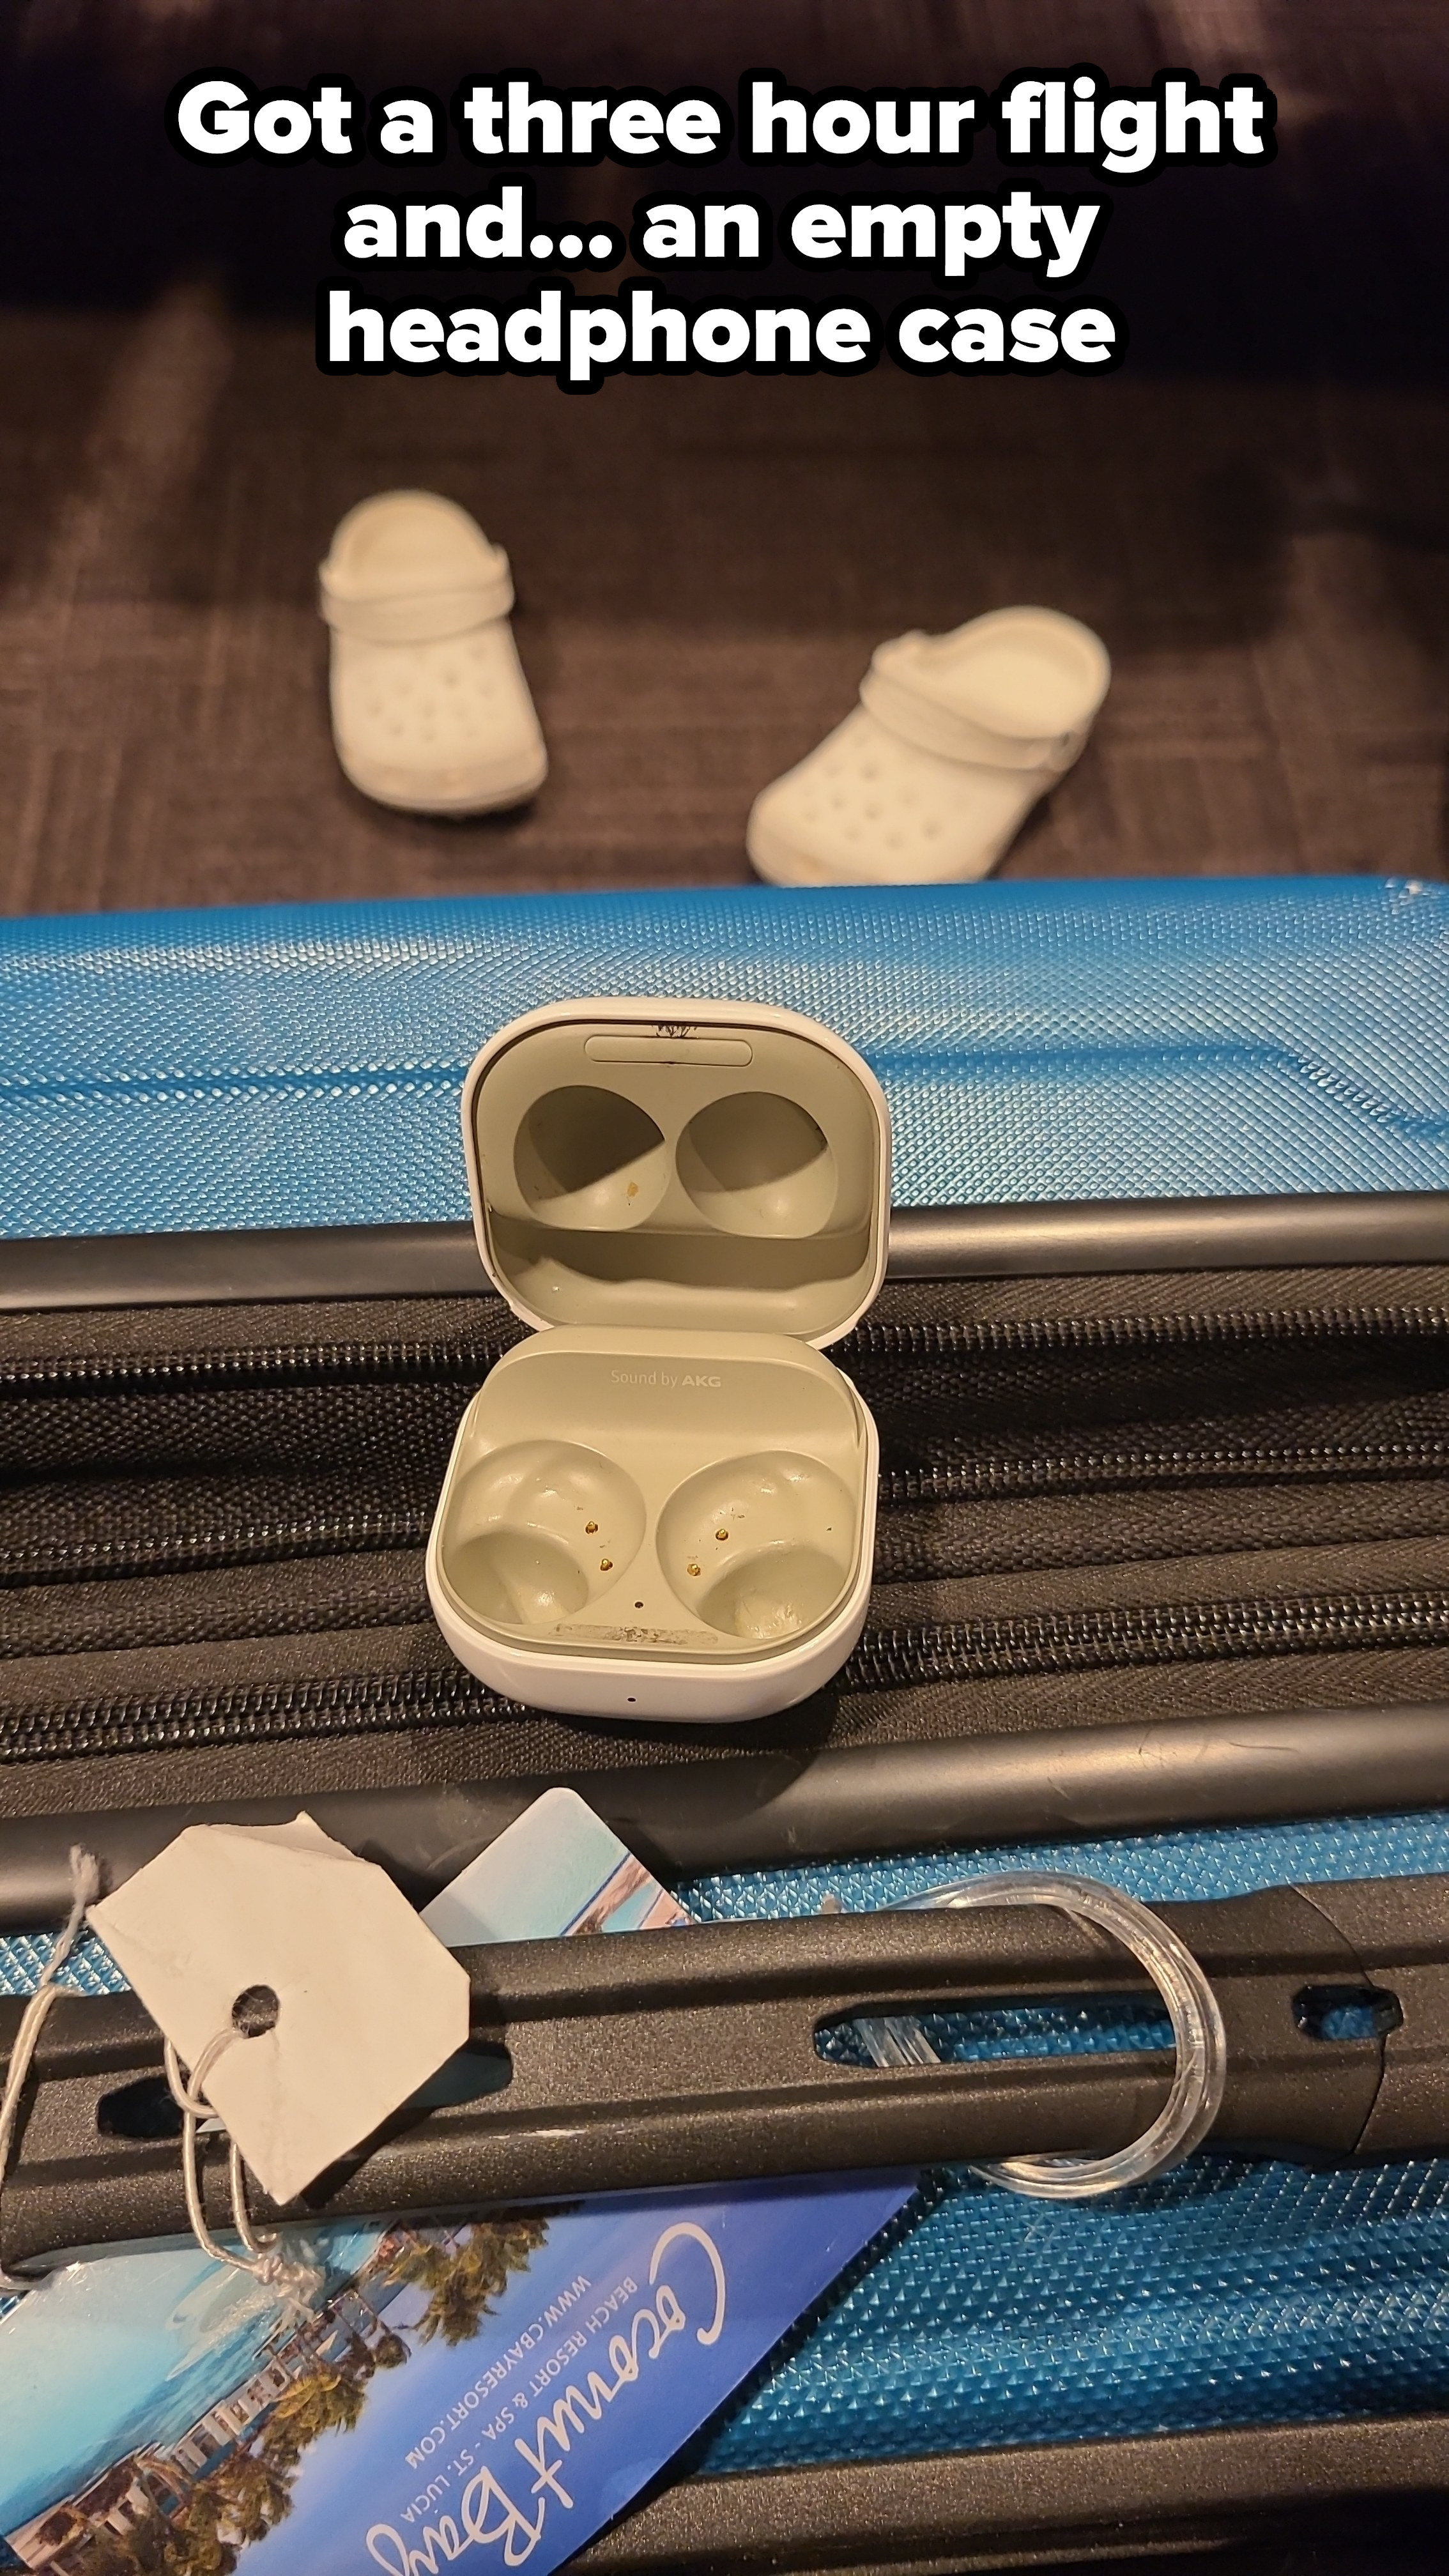 An AirPods case with no AirPods